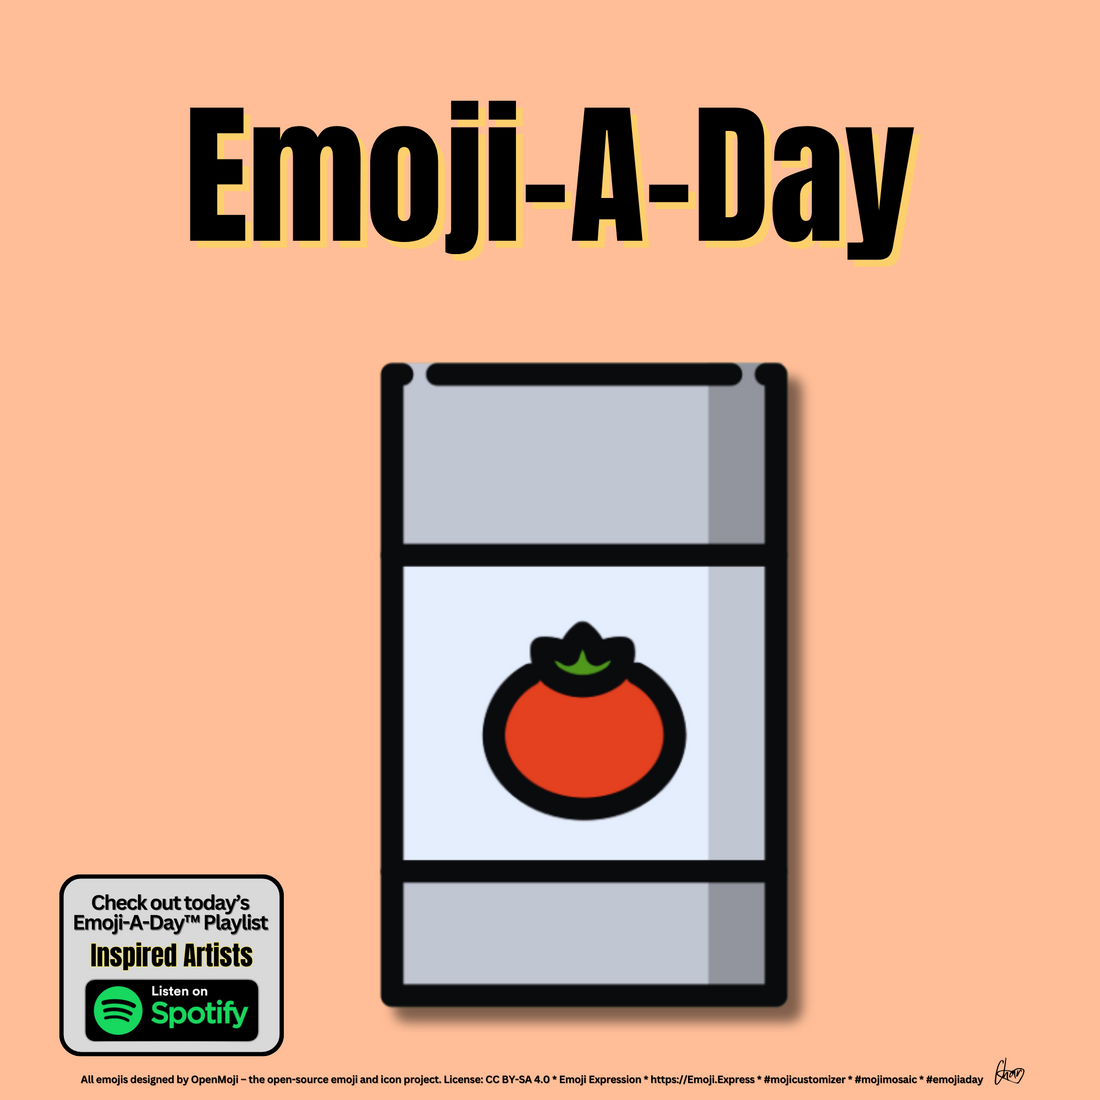 Emoij-A-Day theme with Canned Food emoji and Inspired Artists Spotify Playlist